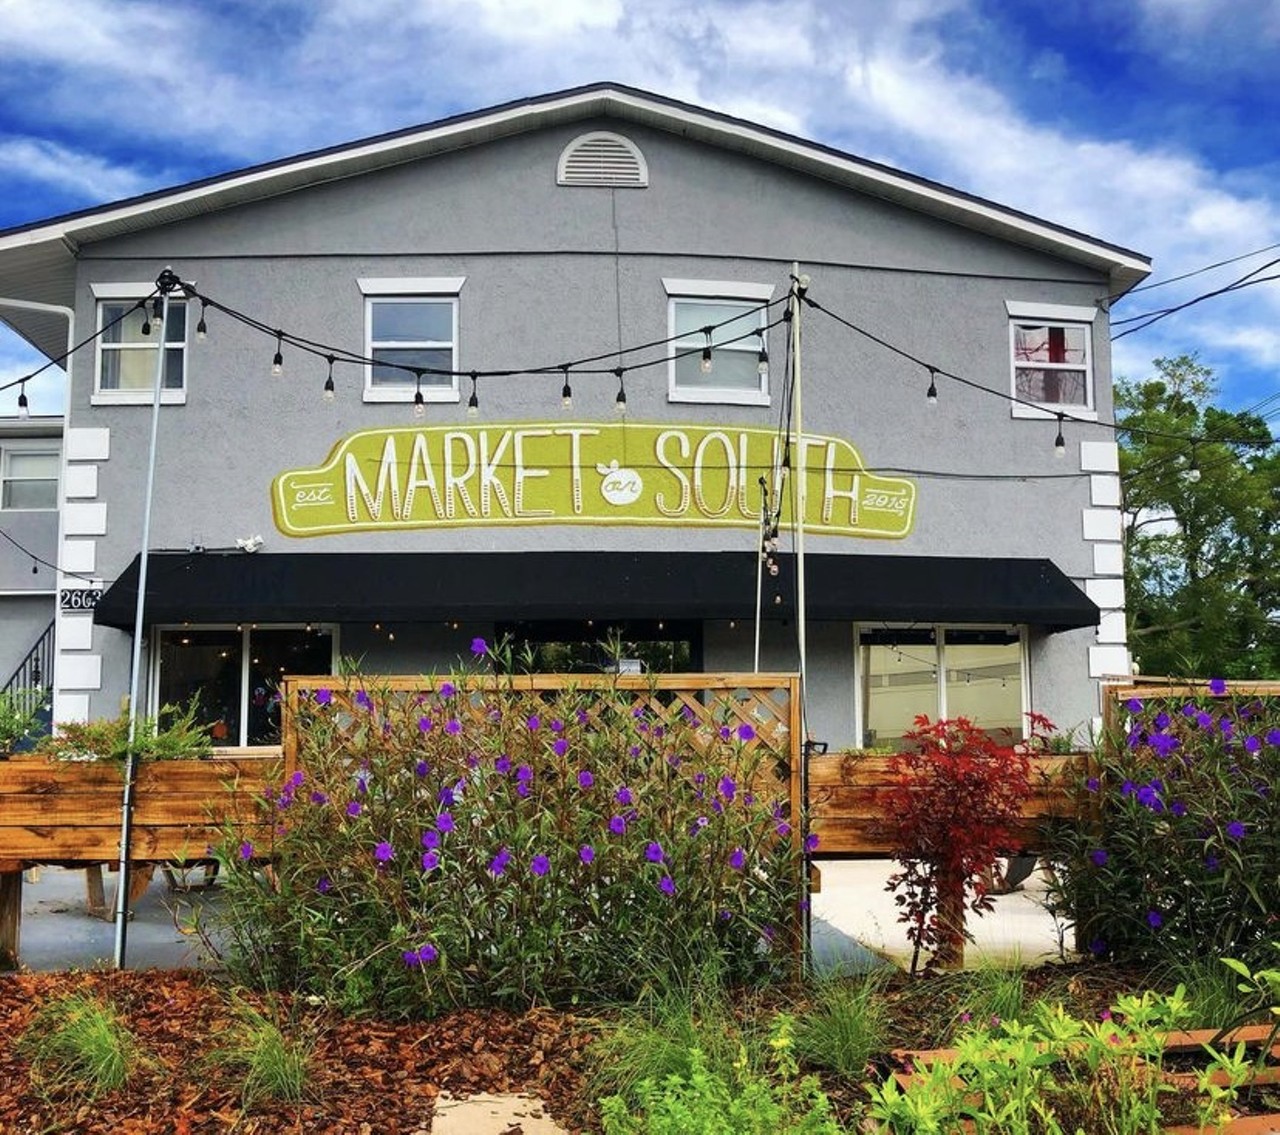 Market on South 
2603 E South St Orlando, FL 32803, (407) 613-5968
Home of plant based meals, drinks and enjoyable desserts accompanied with a beautiful garden looking patio. 
Photo via Market on South/Instagram